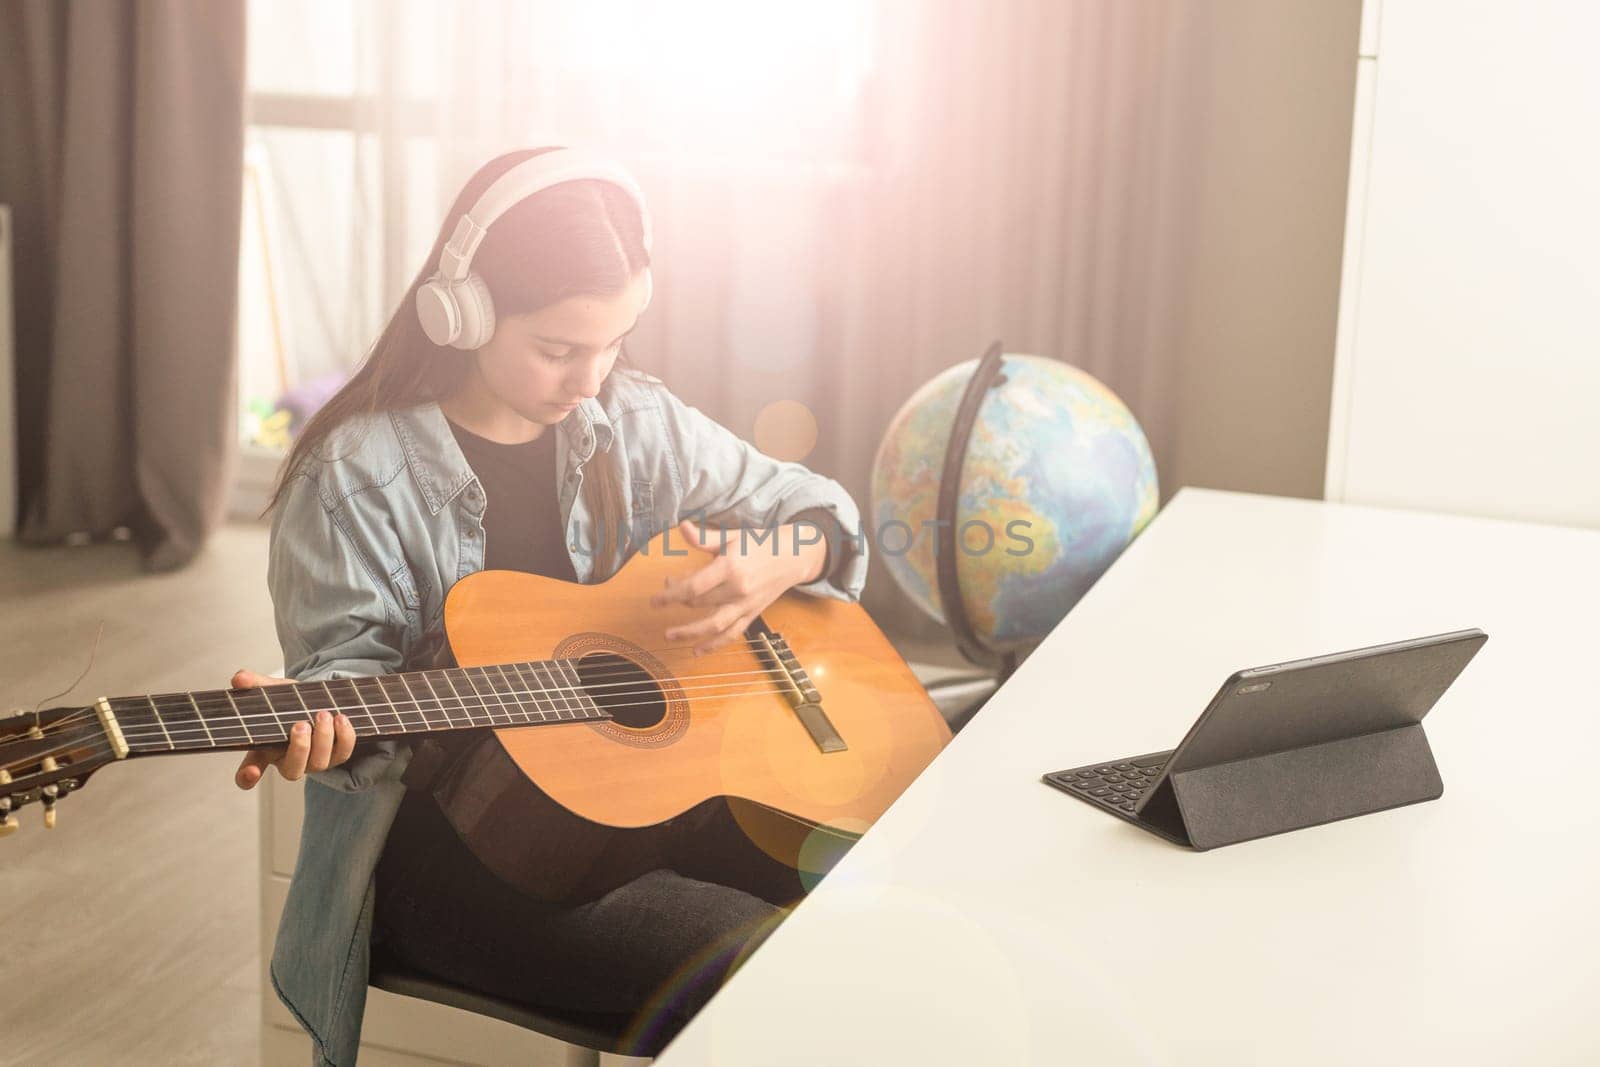 Teenager girl learning to play guitar at home using online lessons. Hobby remote musical education acoustic guitar. Copy space. High quality photo